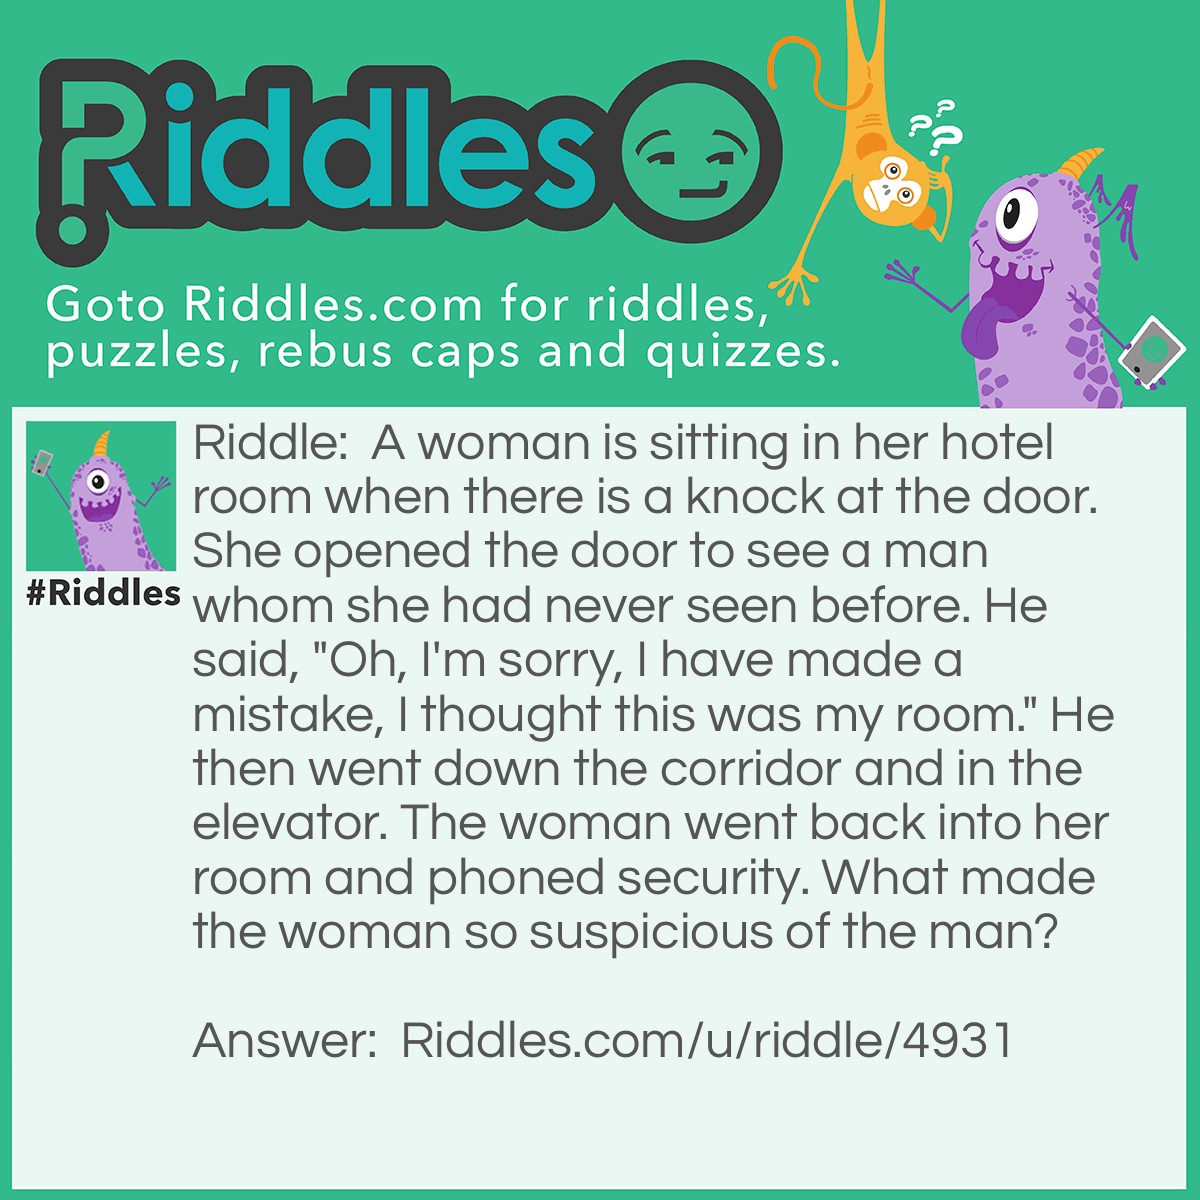 Riddle: A woman is sitting in her hotel room when there is a knock at the door. She opened the door to see a man whom she had never seen before. He said, "Oh, I'm sorry, I have made a mistake, I thought this was my room." He then went down the corridor and in the elevator. The woman went back into her room and phoned security. What made the woman so suspicious of the man? Answer: You don't knock on your own hotel door, as the man did.